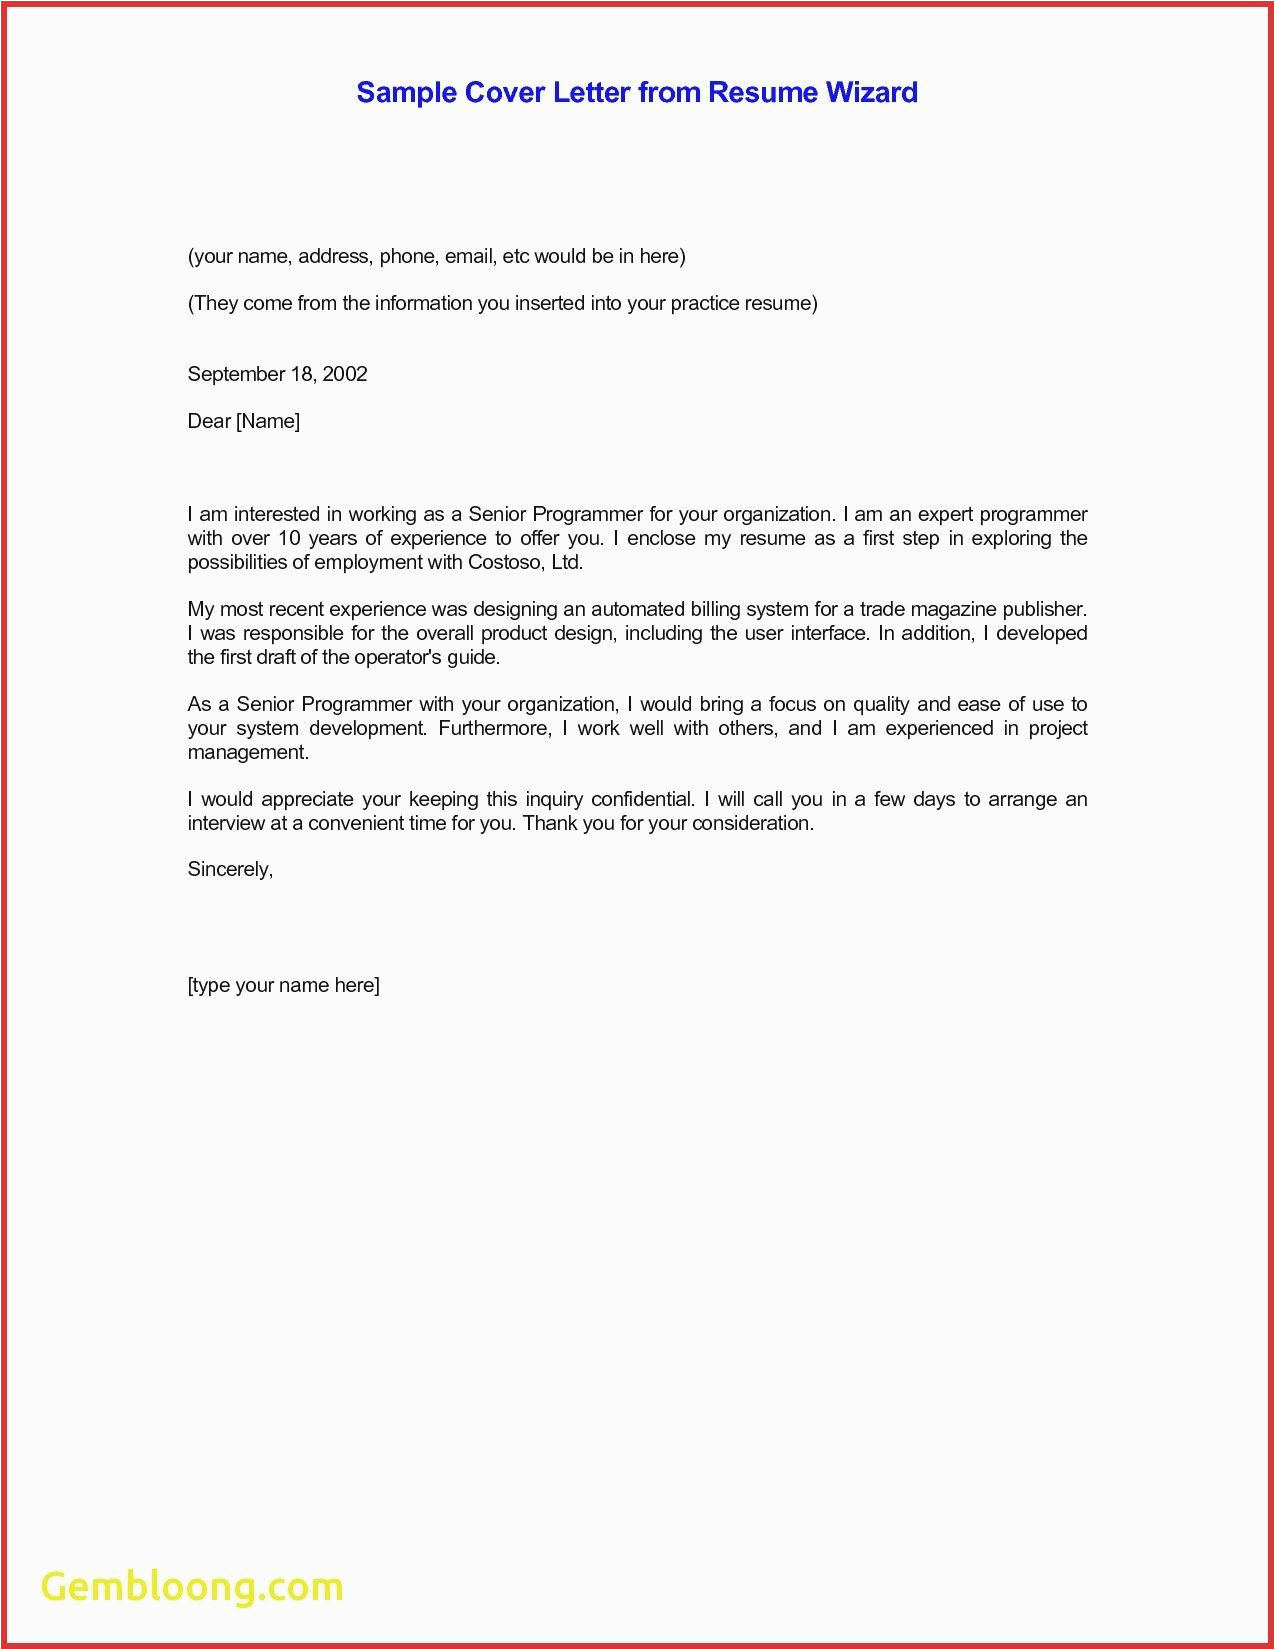 Email to Send Cover Letter and Resume Sample Email Cv Cover Letter Template Resume format